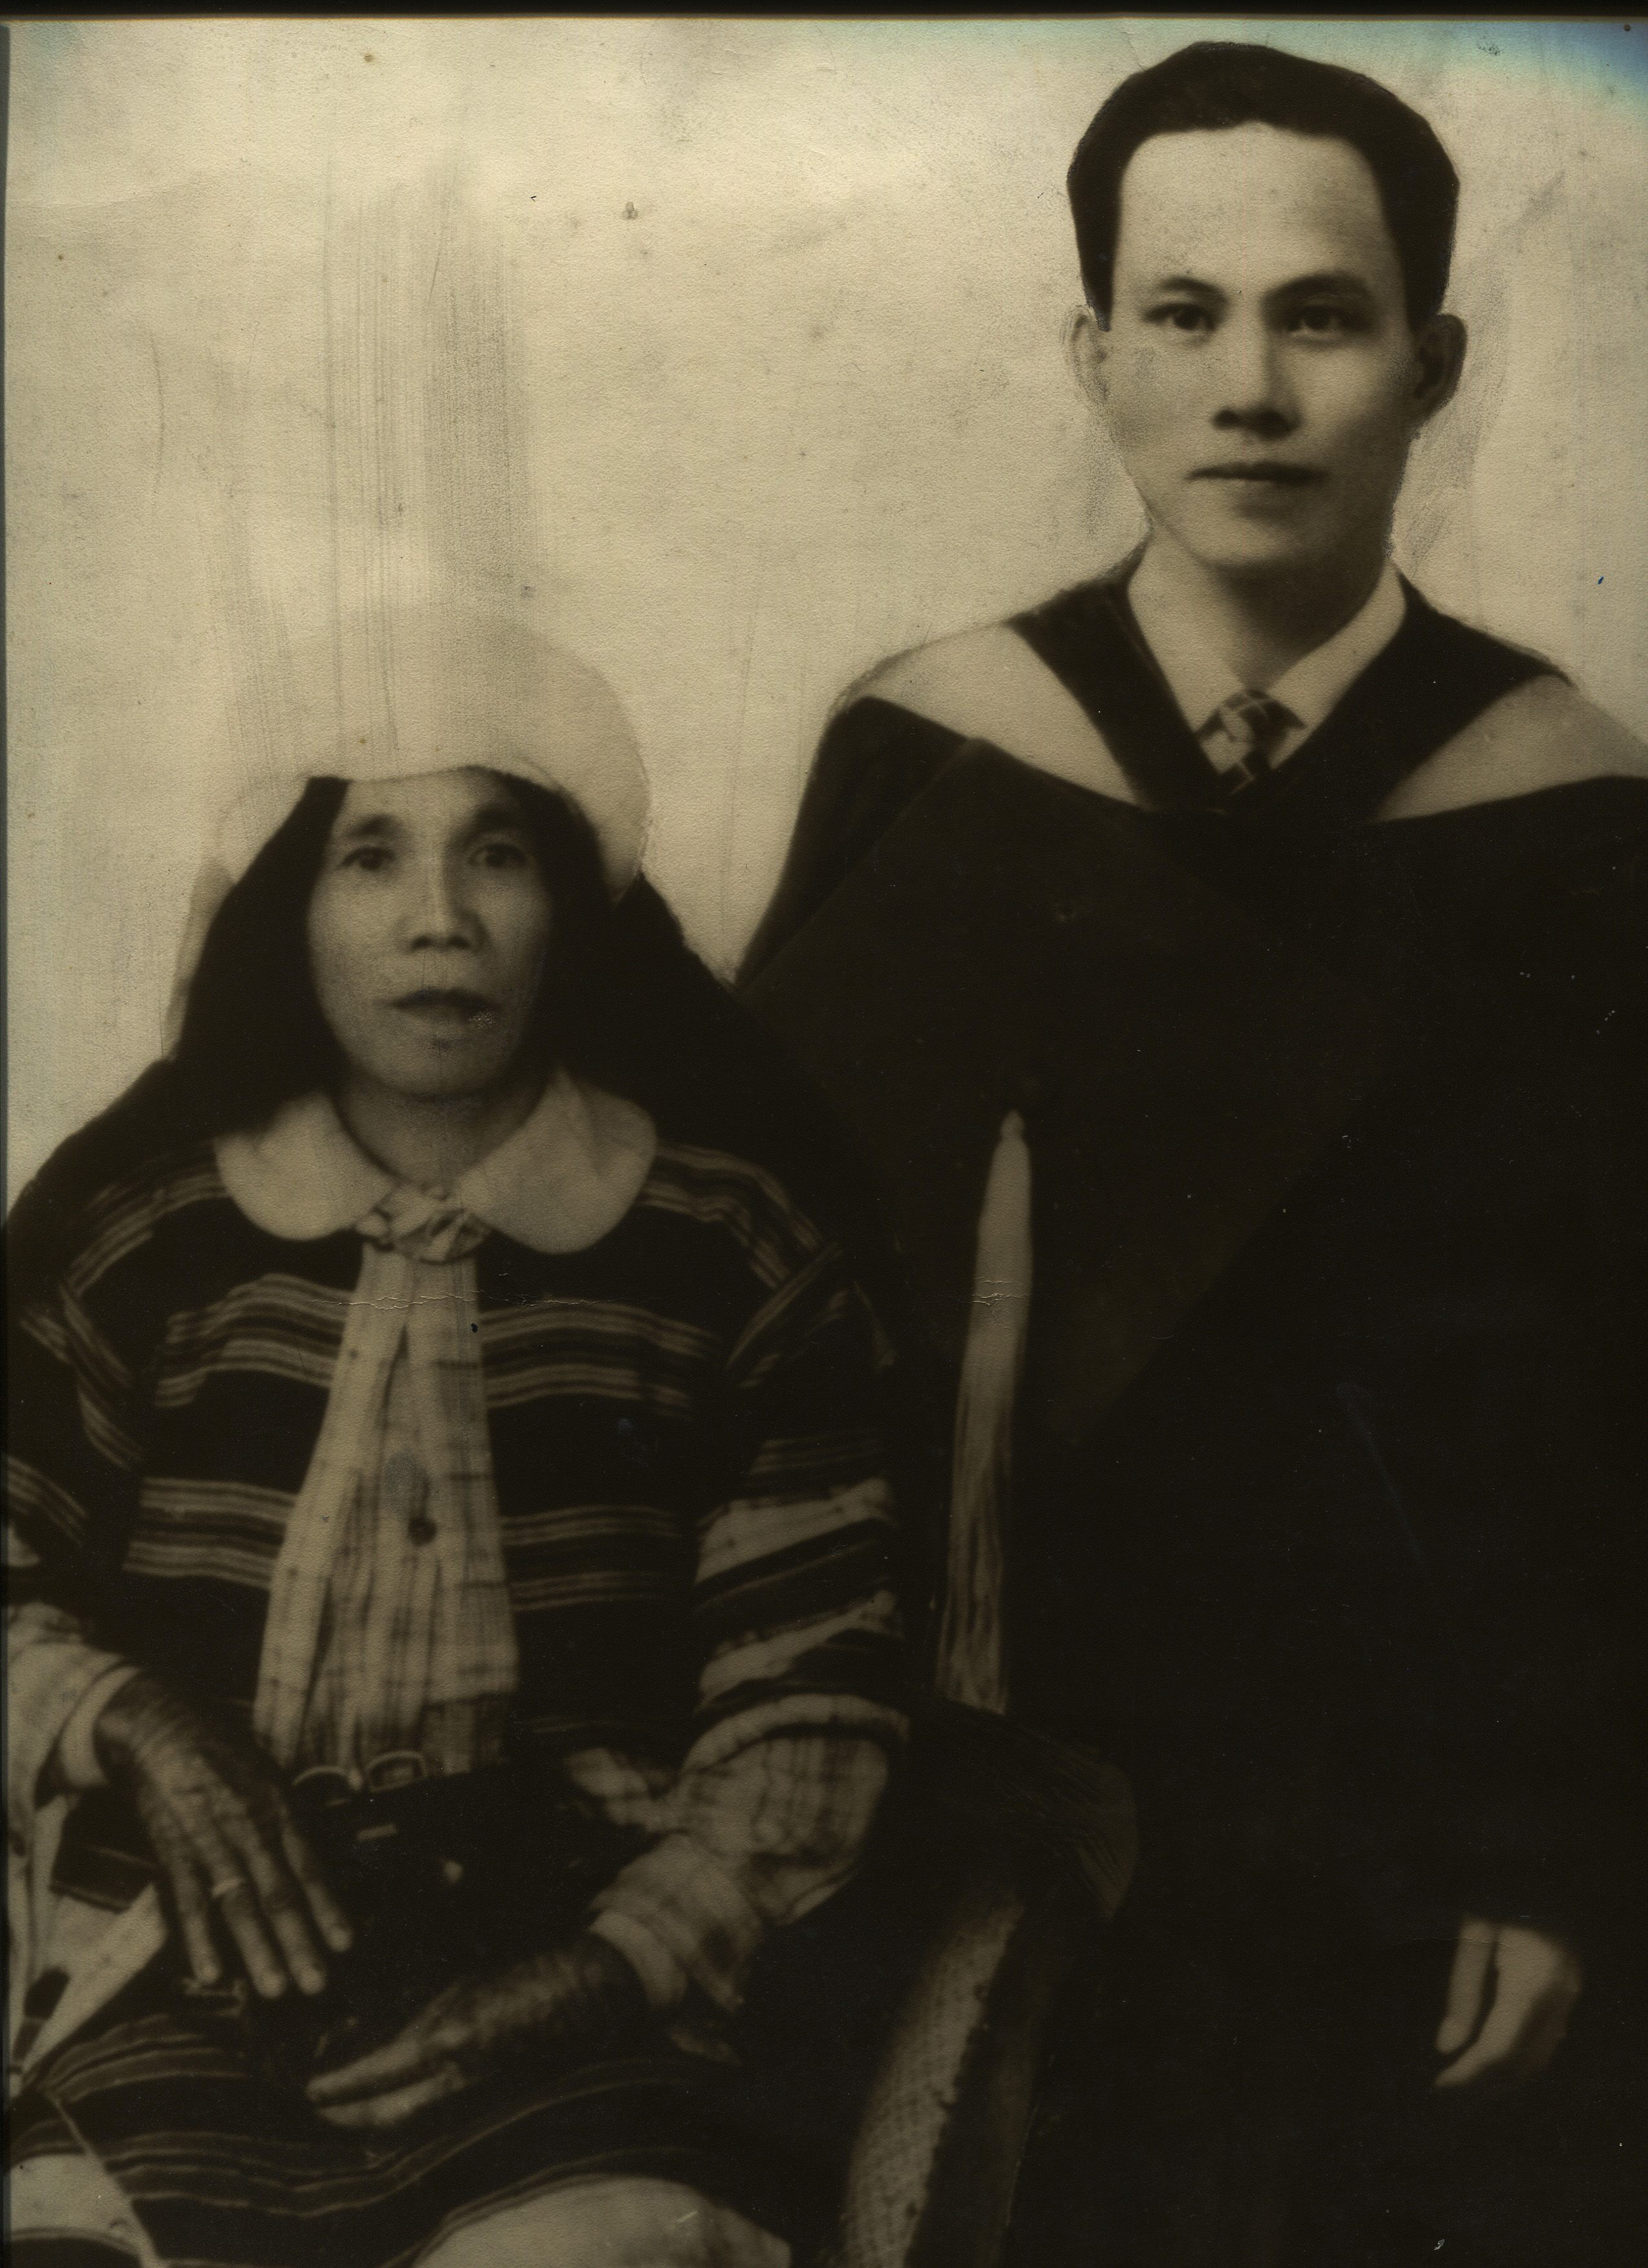 Carol Lamen's great-grandmother, Gloria Dickman, and her grandfather (Gloria's son) Kenny. Taken in Baguio, Philippines, while Kenny was in law school. He later joined the army and died in the Bataan Death March. Any views, findings, conclusions, or recommendations expressed in this story do not necessarily represent those of the National Endowment for the Humanities. 